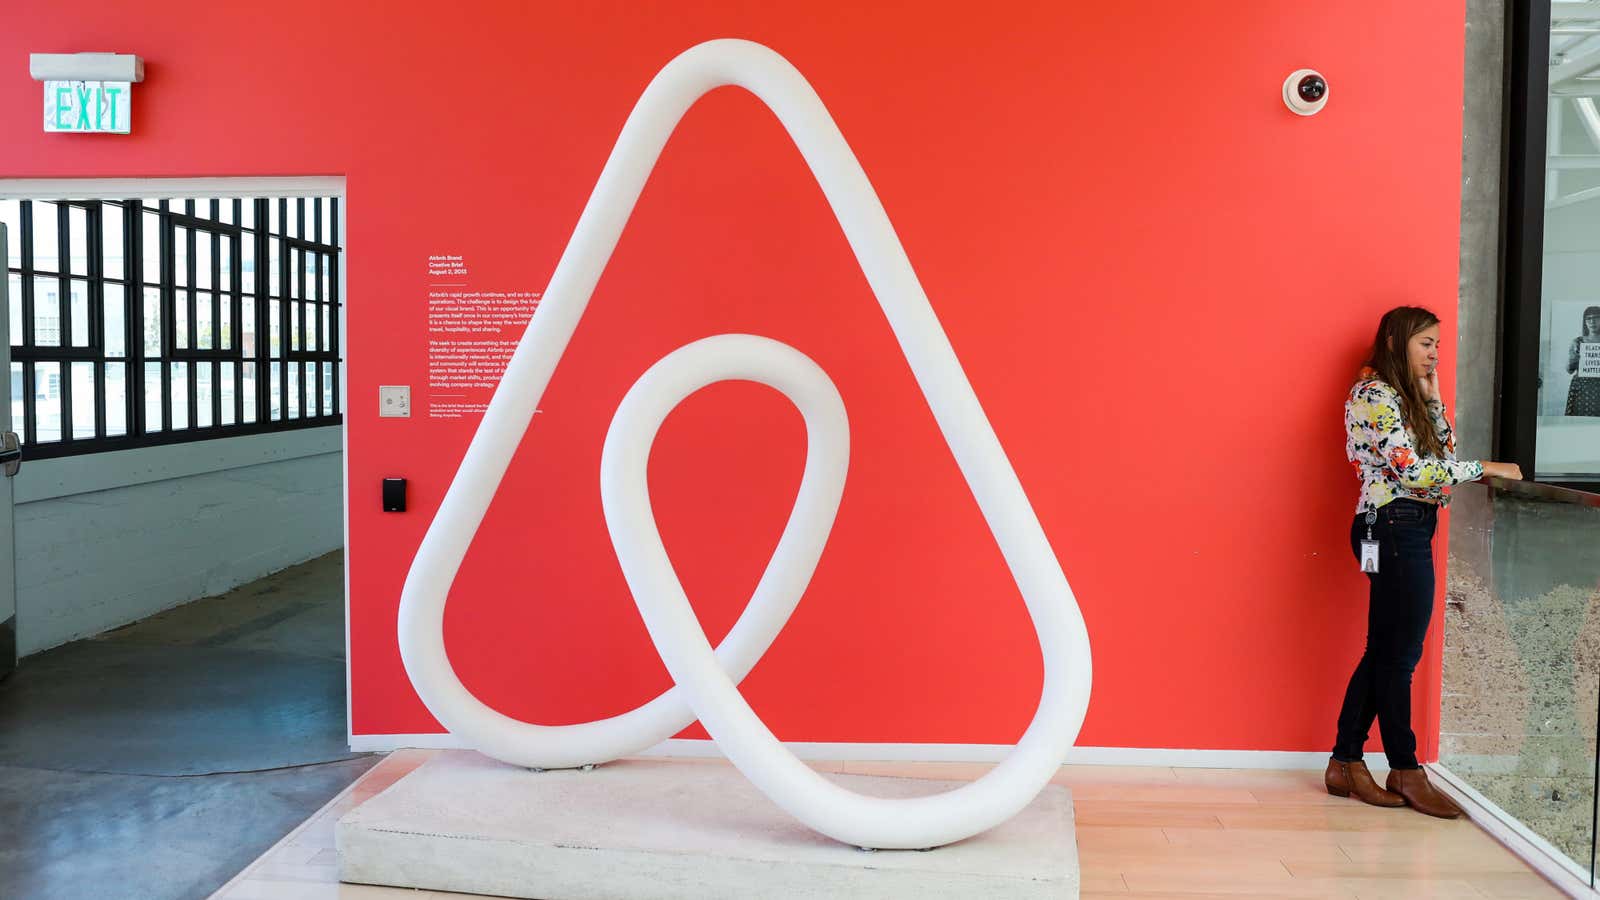 Greg Greeley will need to make Airbnb belong everywhere.